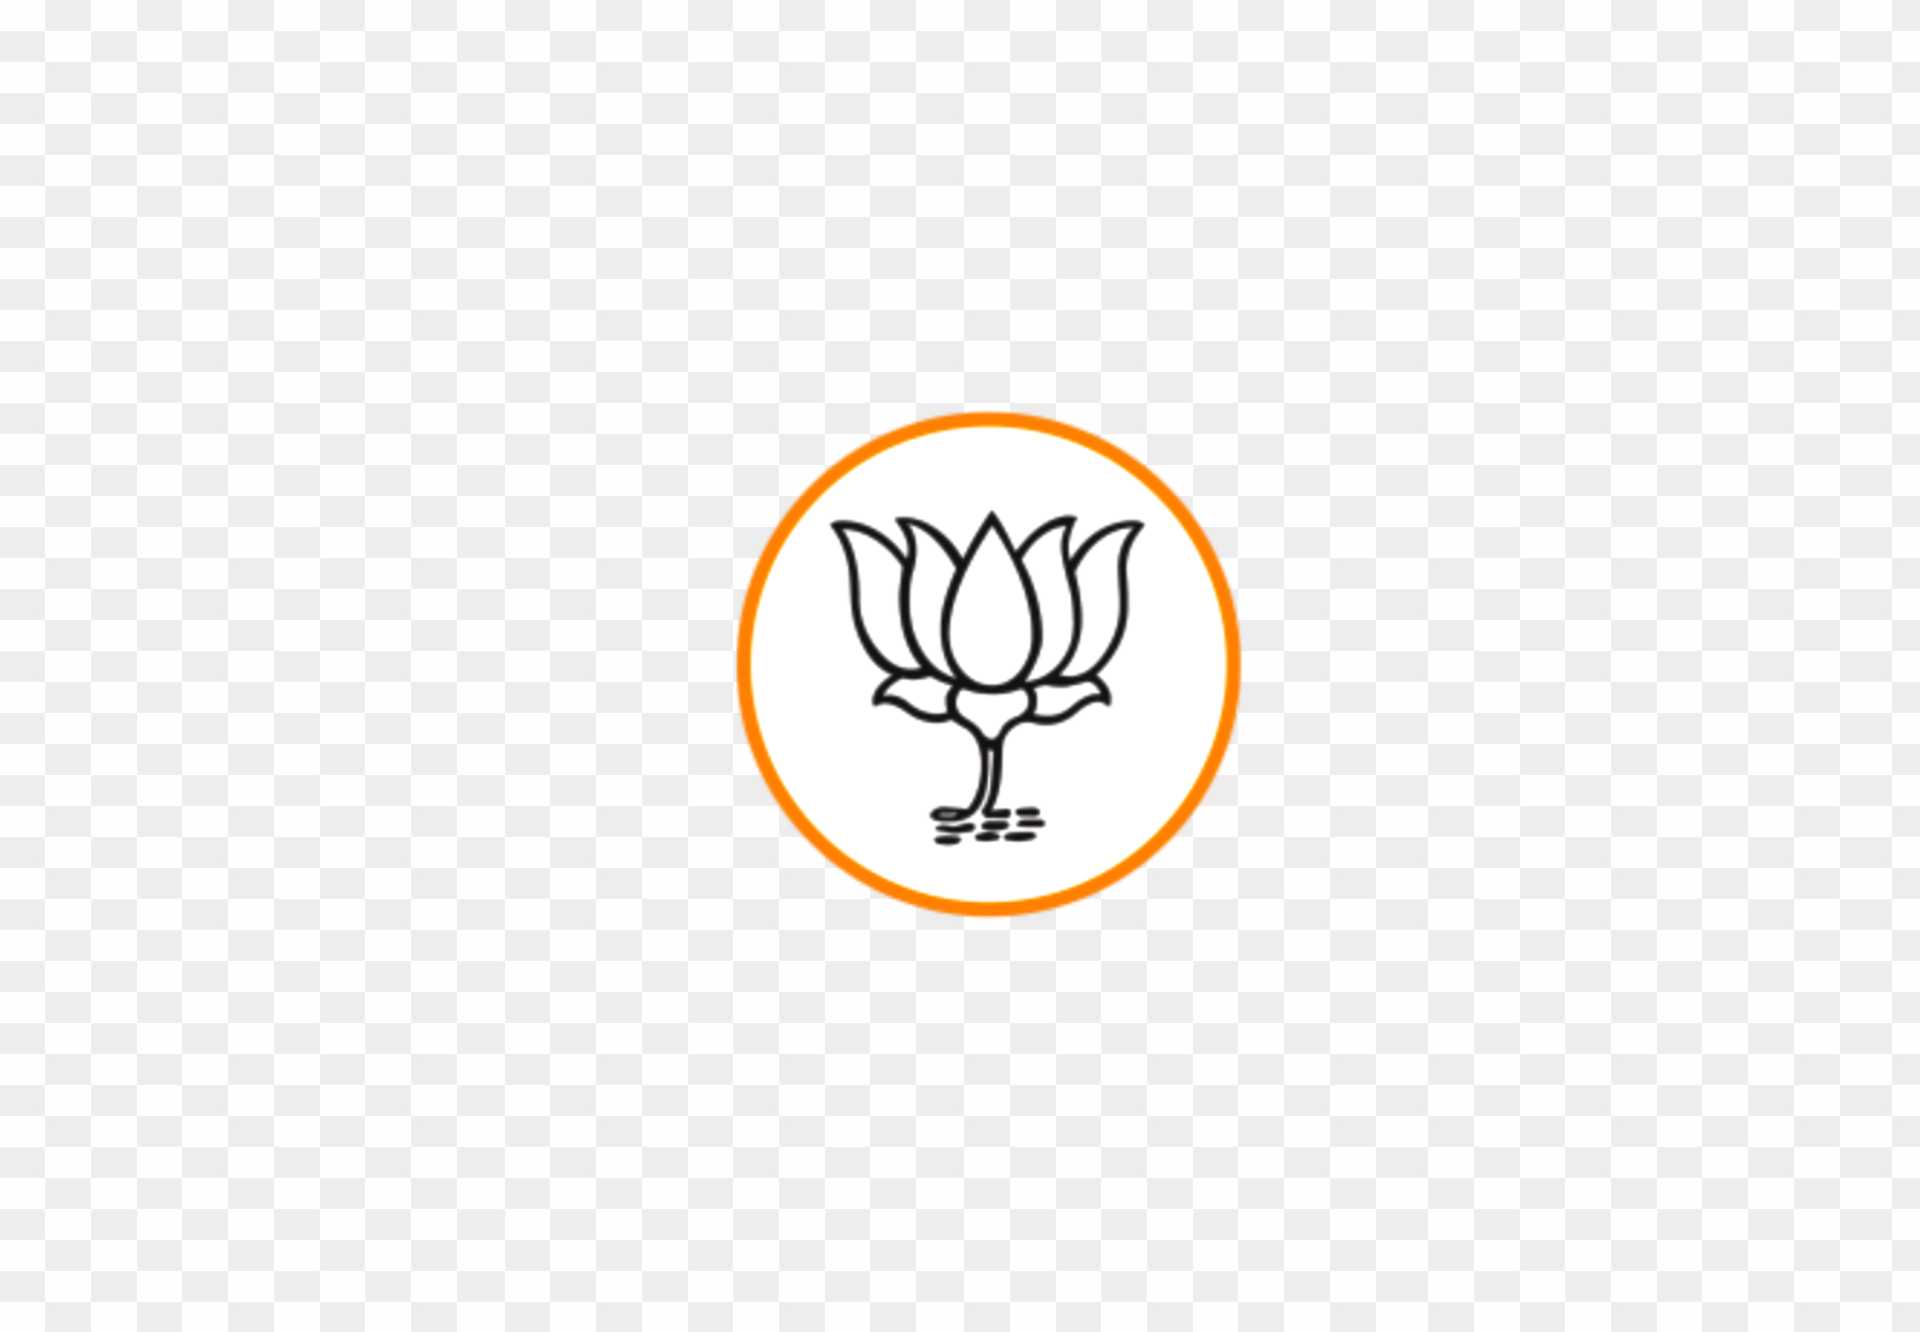 BJP Logo Black and White PNG Downlaod: Vector File | PNG File